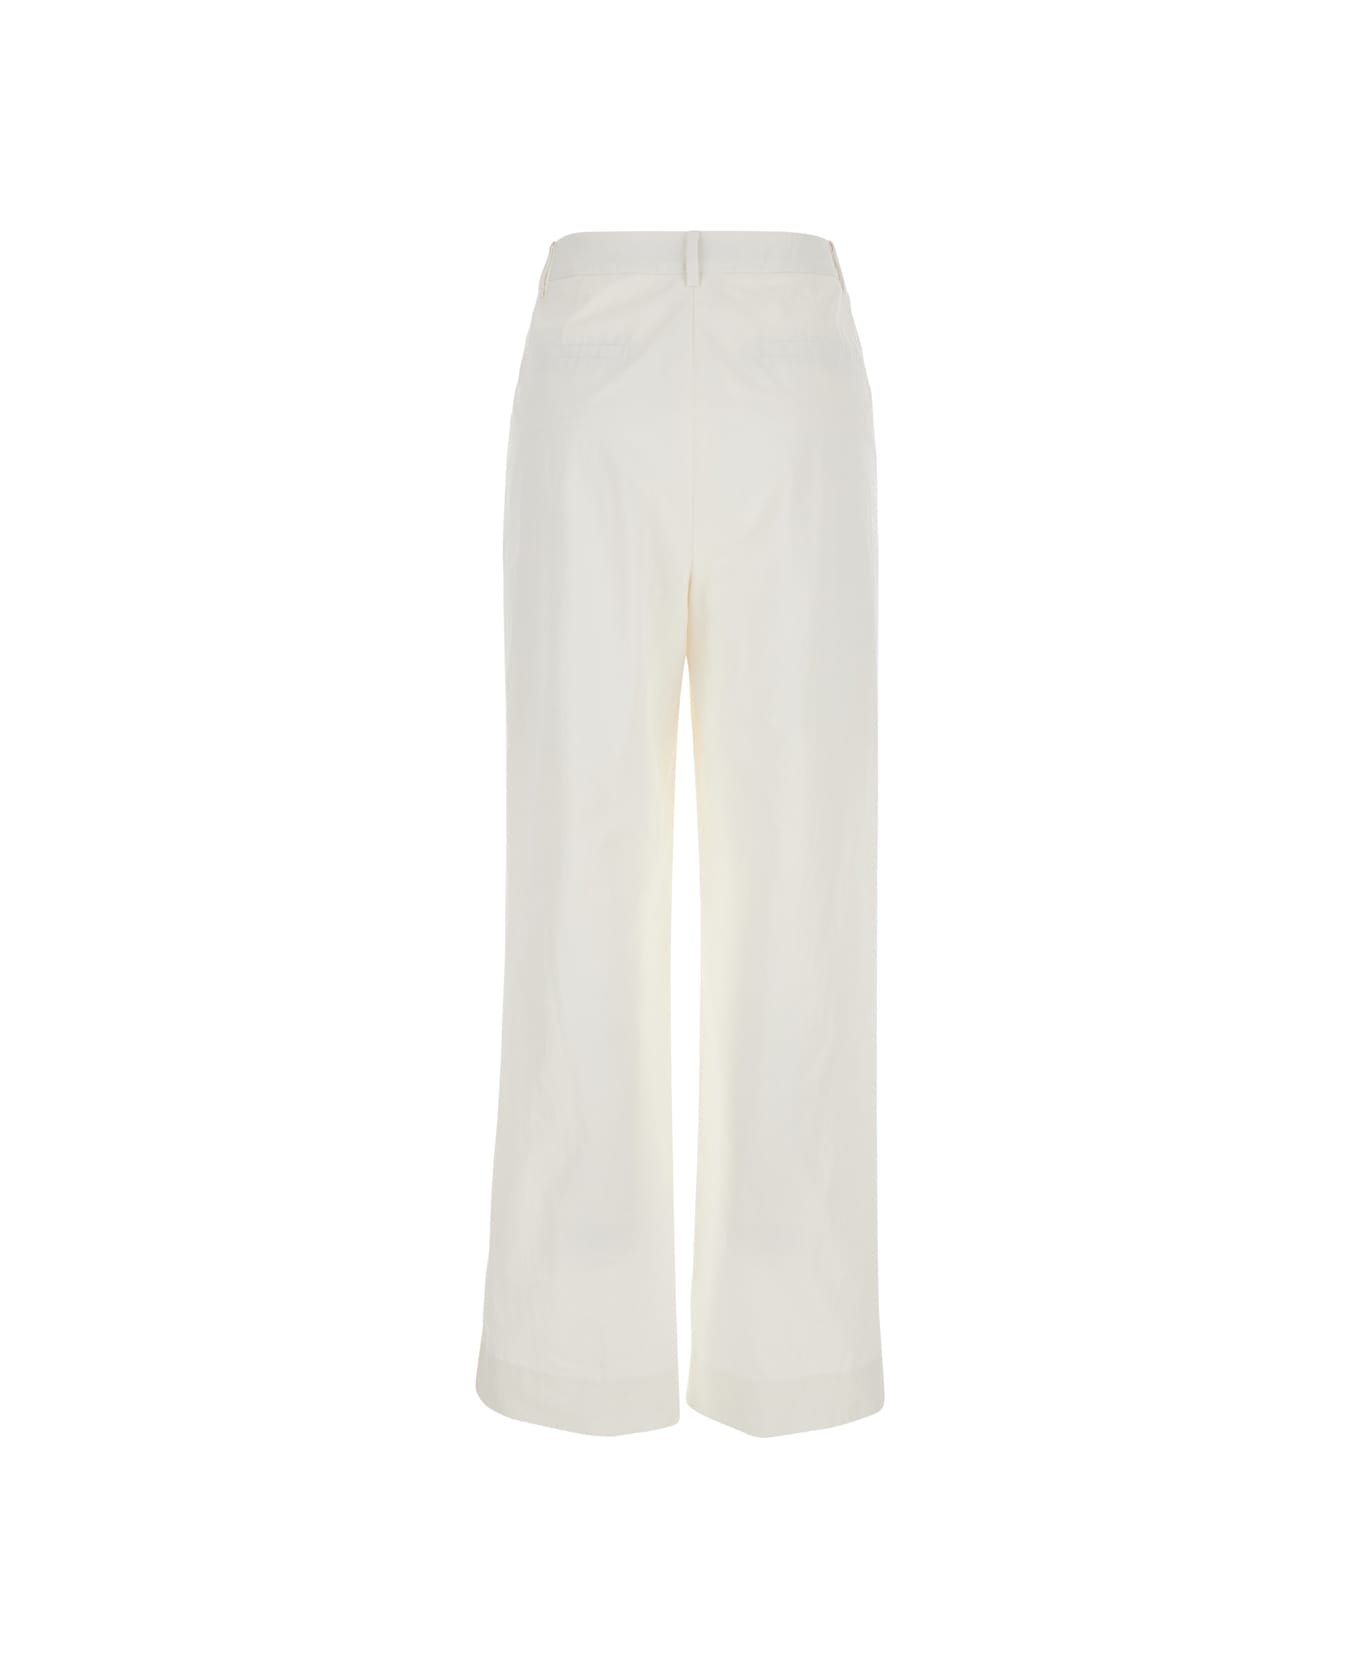 Dunst White Wide Pants In Cotton Blend Woman - White ボトムス